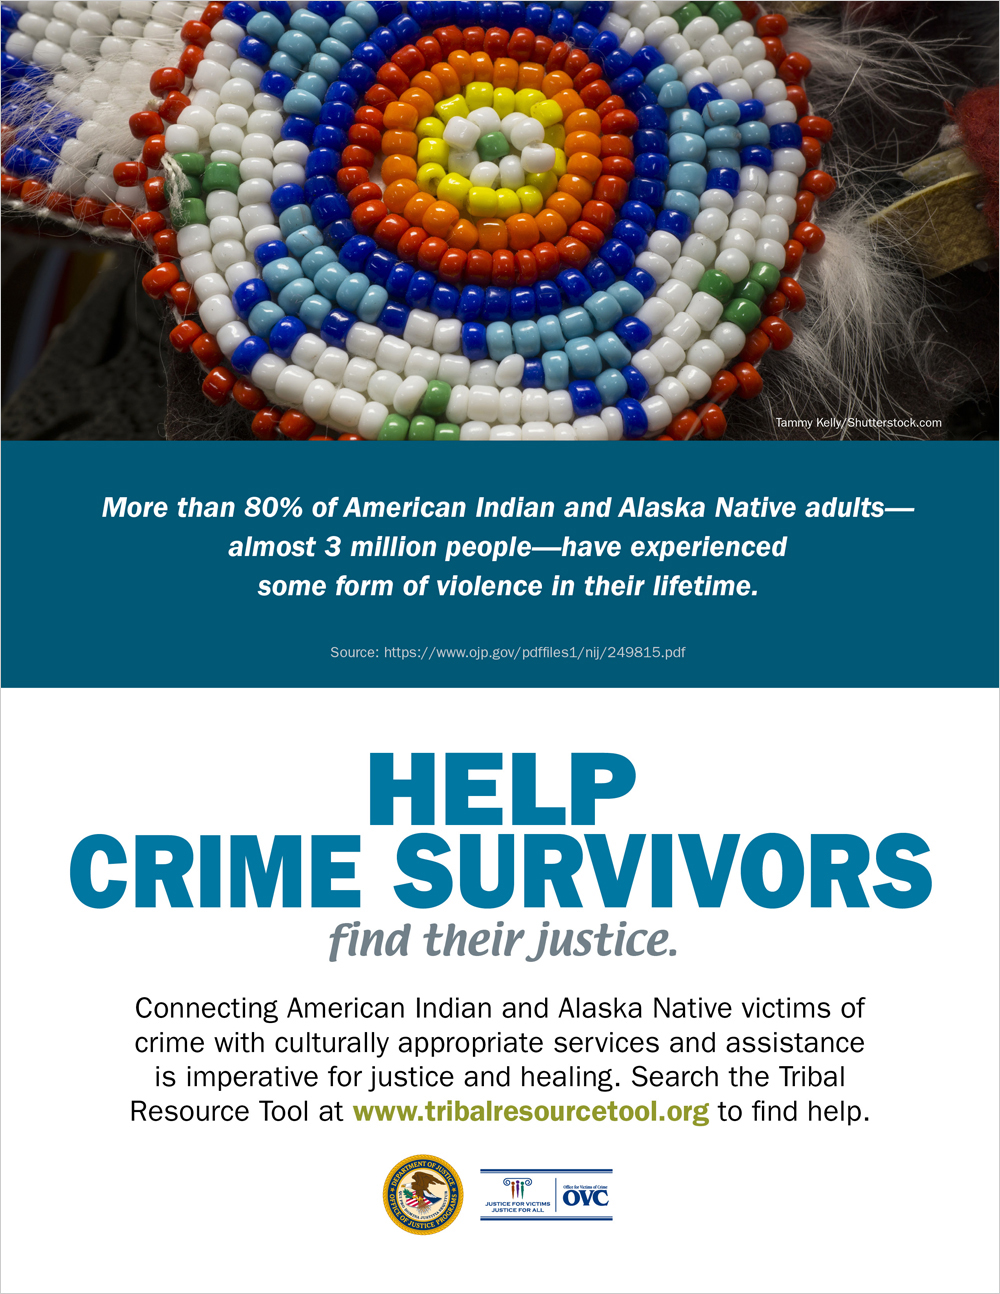 2022 National Crime Victims' Rights Week Awareness Poster - Victim Services in American Indian/Alaska Native Communities